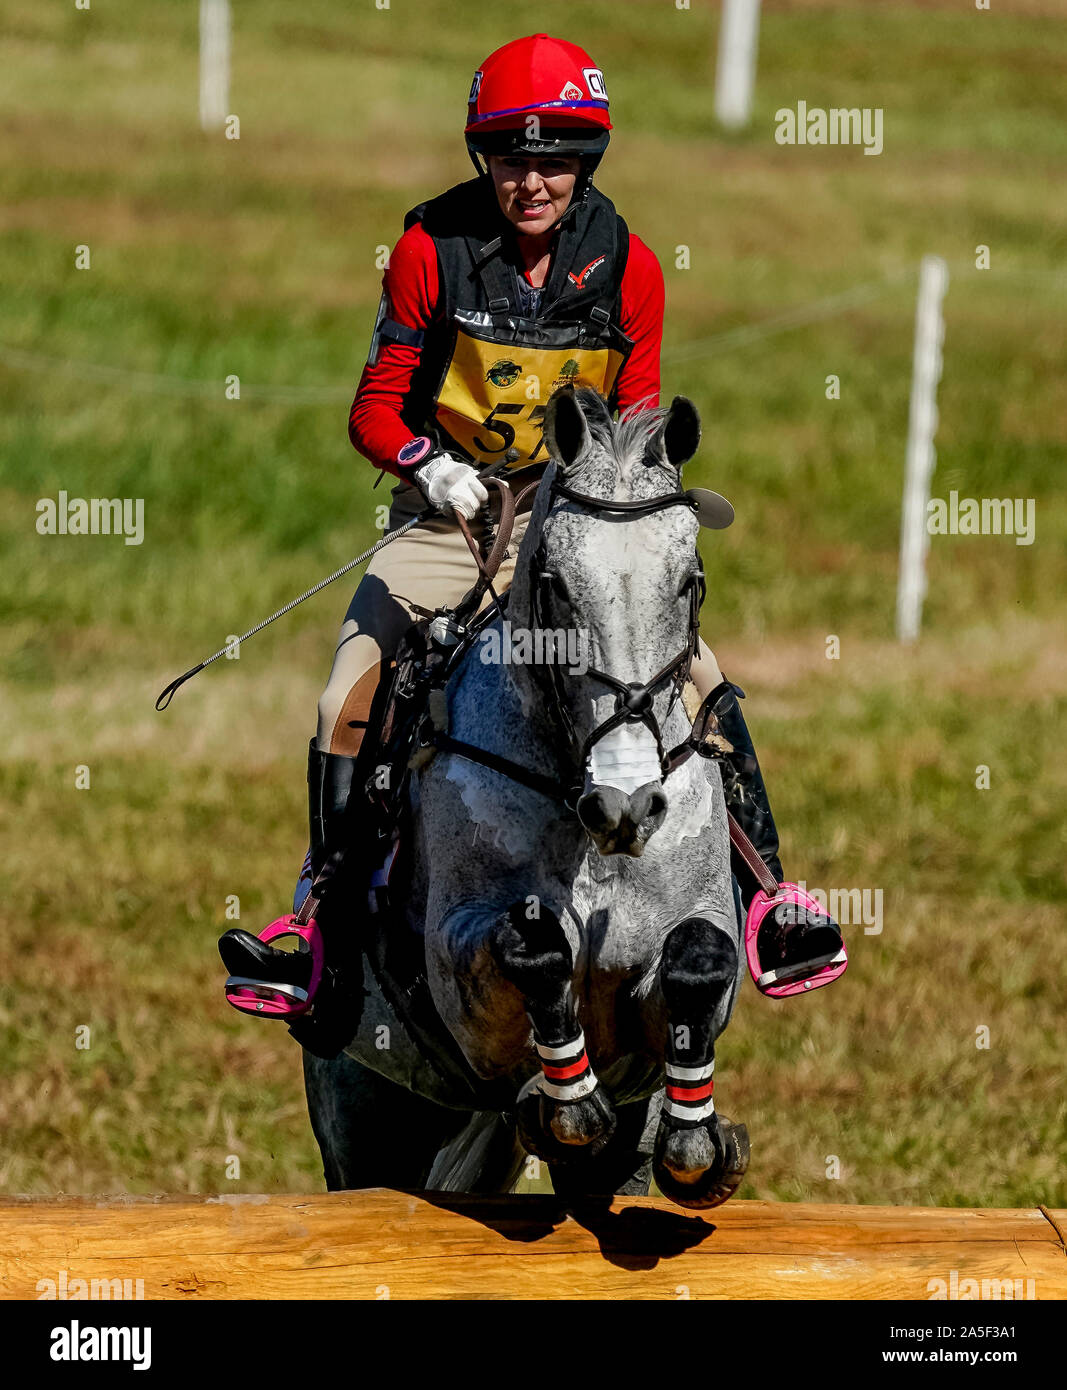 October 19, 2019, Fair Hill, MD, USA: October 20, 2019 : Local rider Juli Sebring (USA), from Elkton, and Welbourne clear an obstacle during the Cross Country Test at the Fair Hill International 3-Day Event at the Fair Hill Natural Resources Area in Fair Hill, Maryland. This is the final year of a 31-year run of the event at this location. In 2020, the event moves to a new facility in the Fair Hill area and will eventually be upgraded to one of two CCI 5* events in the United States. Scott Serio/Eclipse Sportswire/CSM Stock Photo